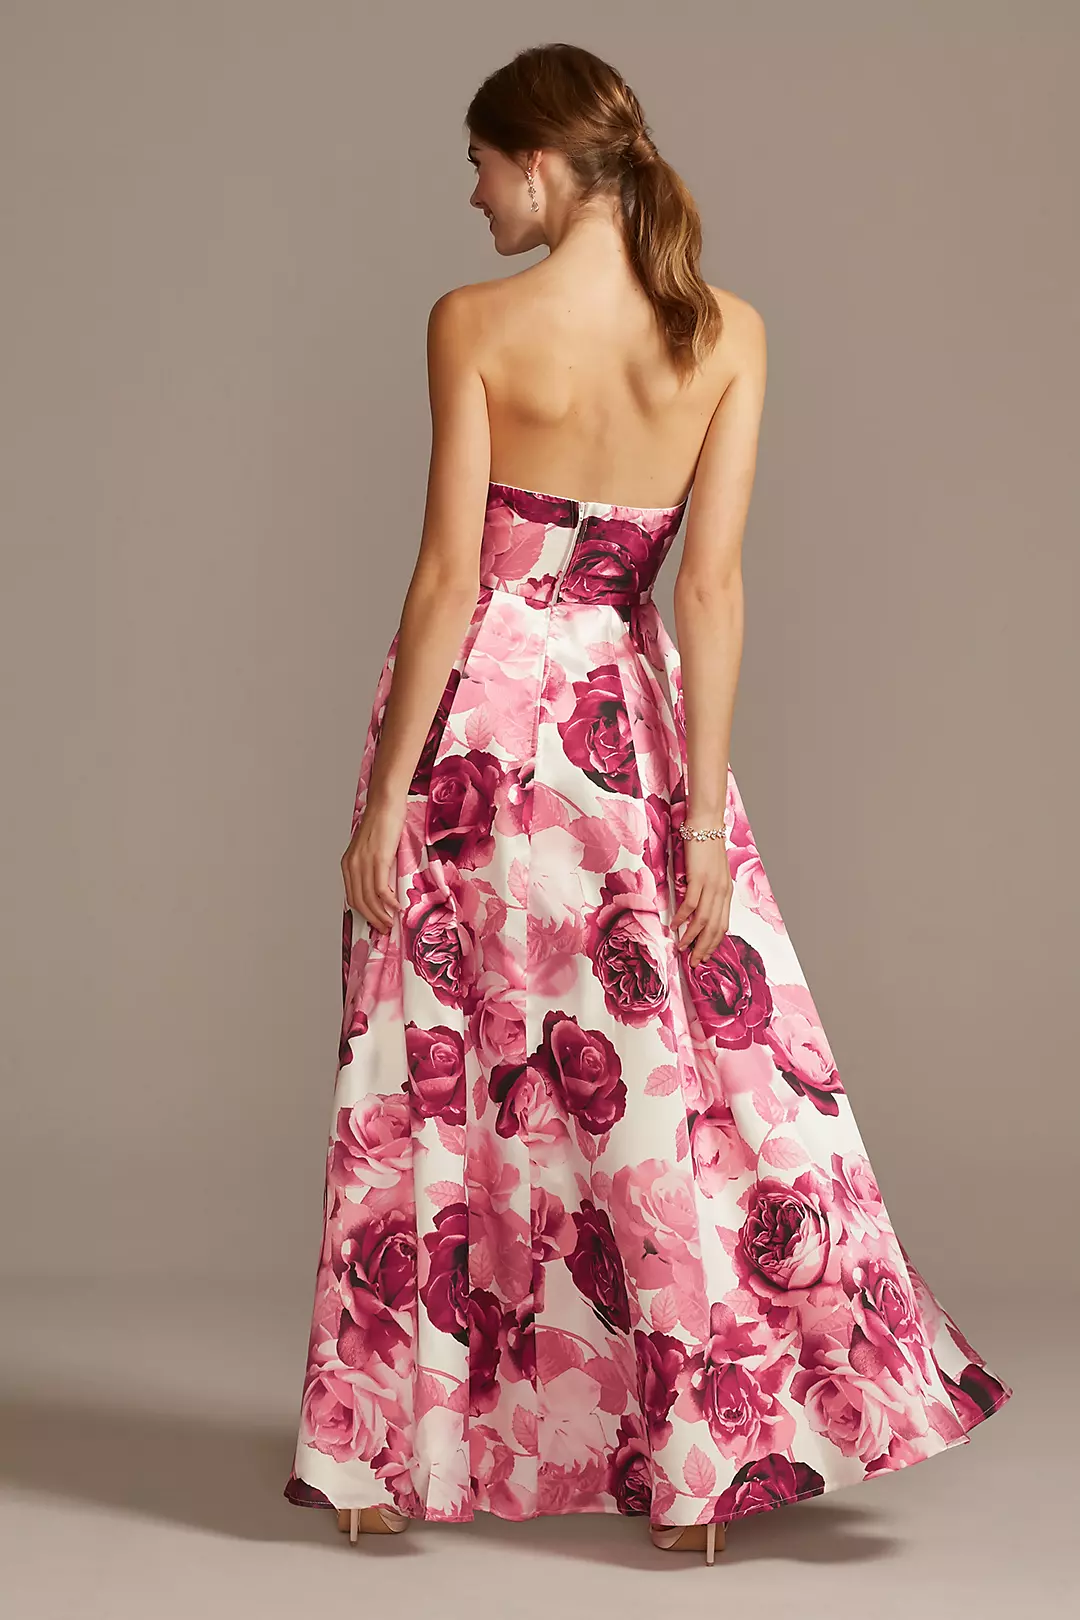 Floral Print Strapless Satin Gown with Pockets | David's Bridal